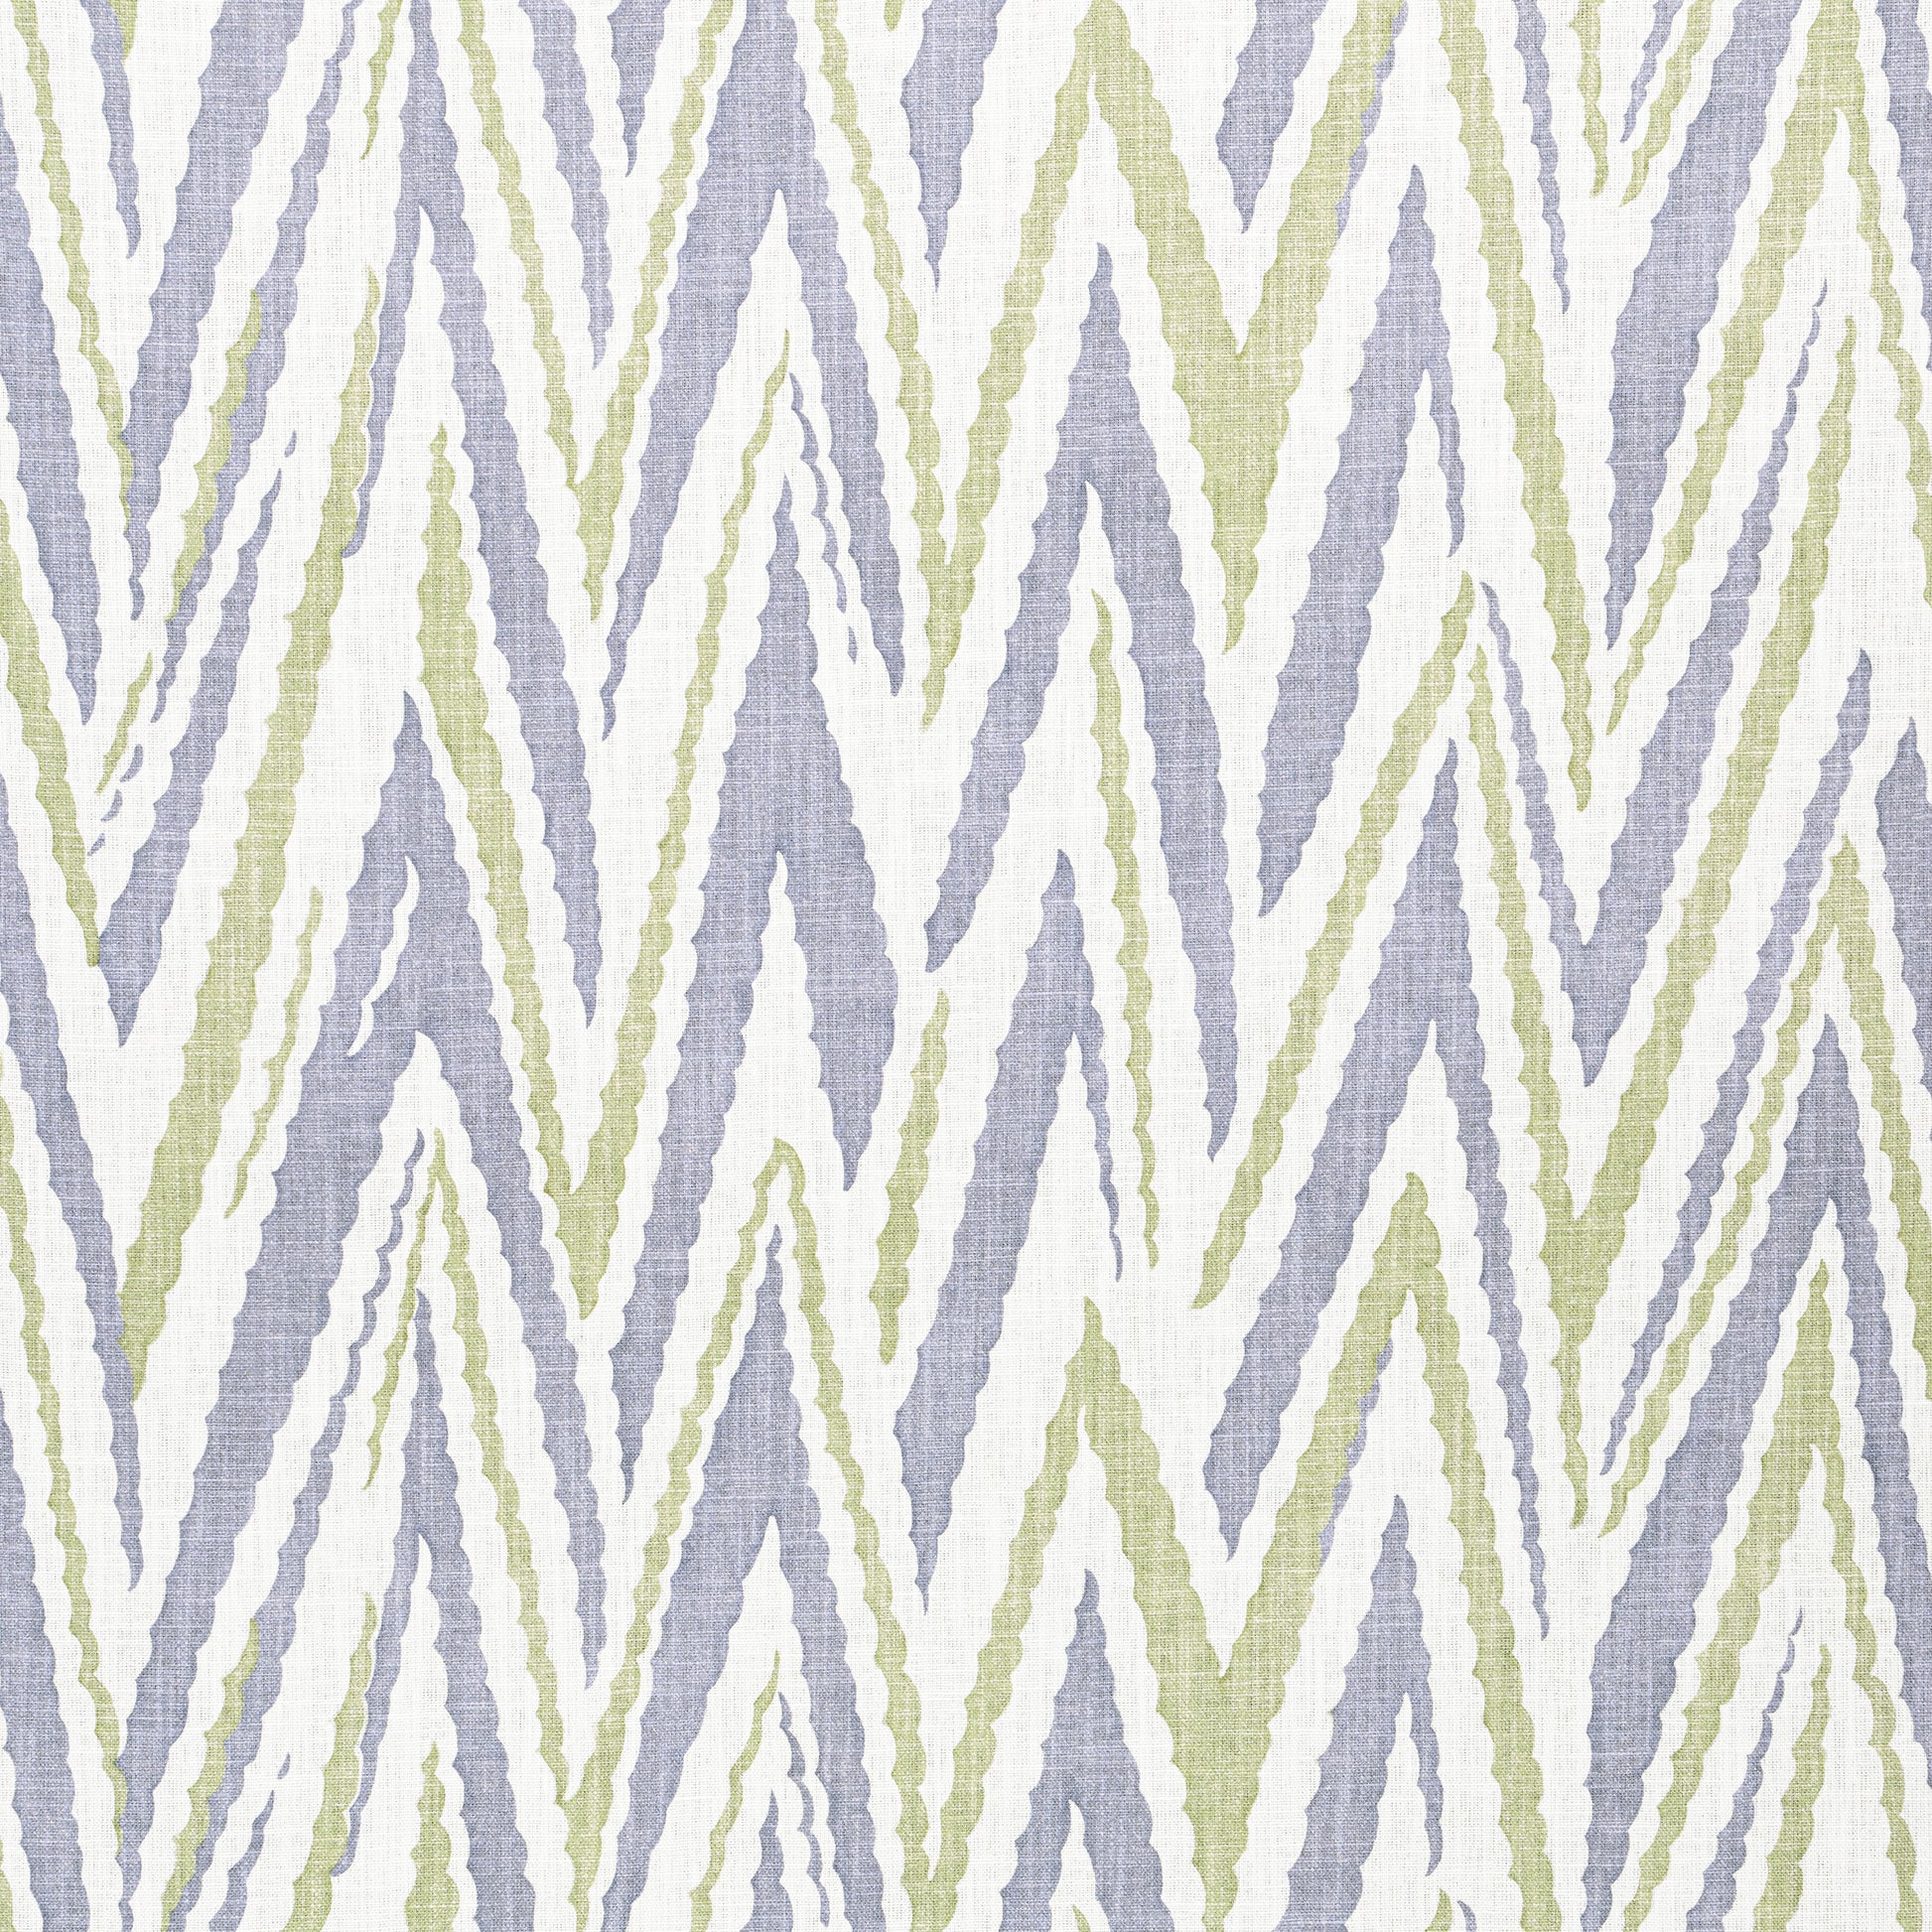 Purchase  Ann French Fabric Pattern number AF23143  pattern name  Highland Peak